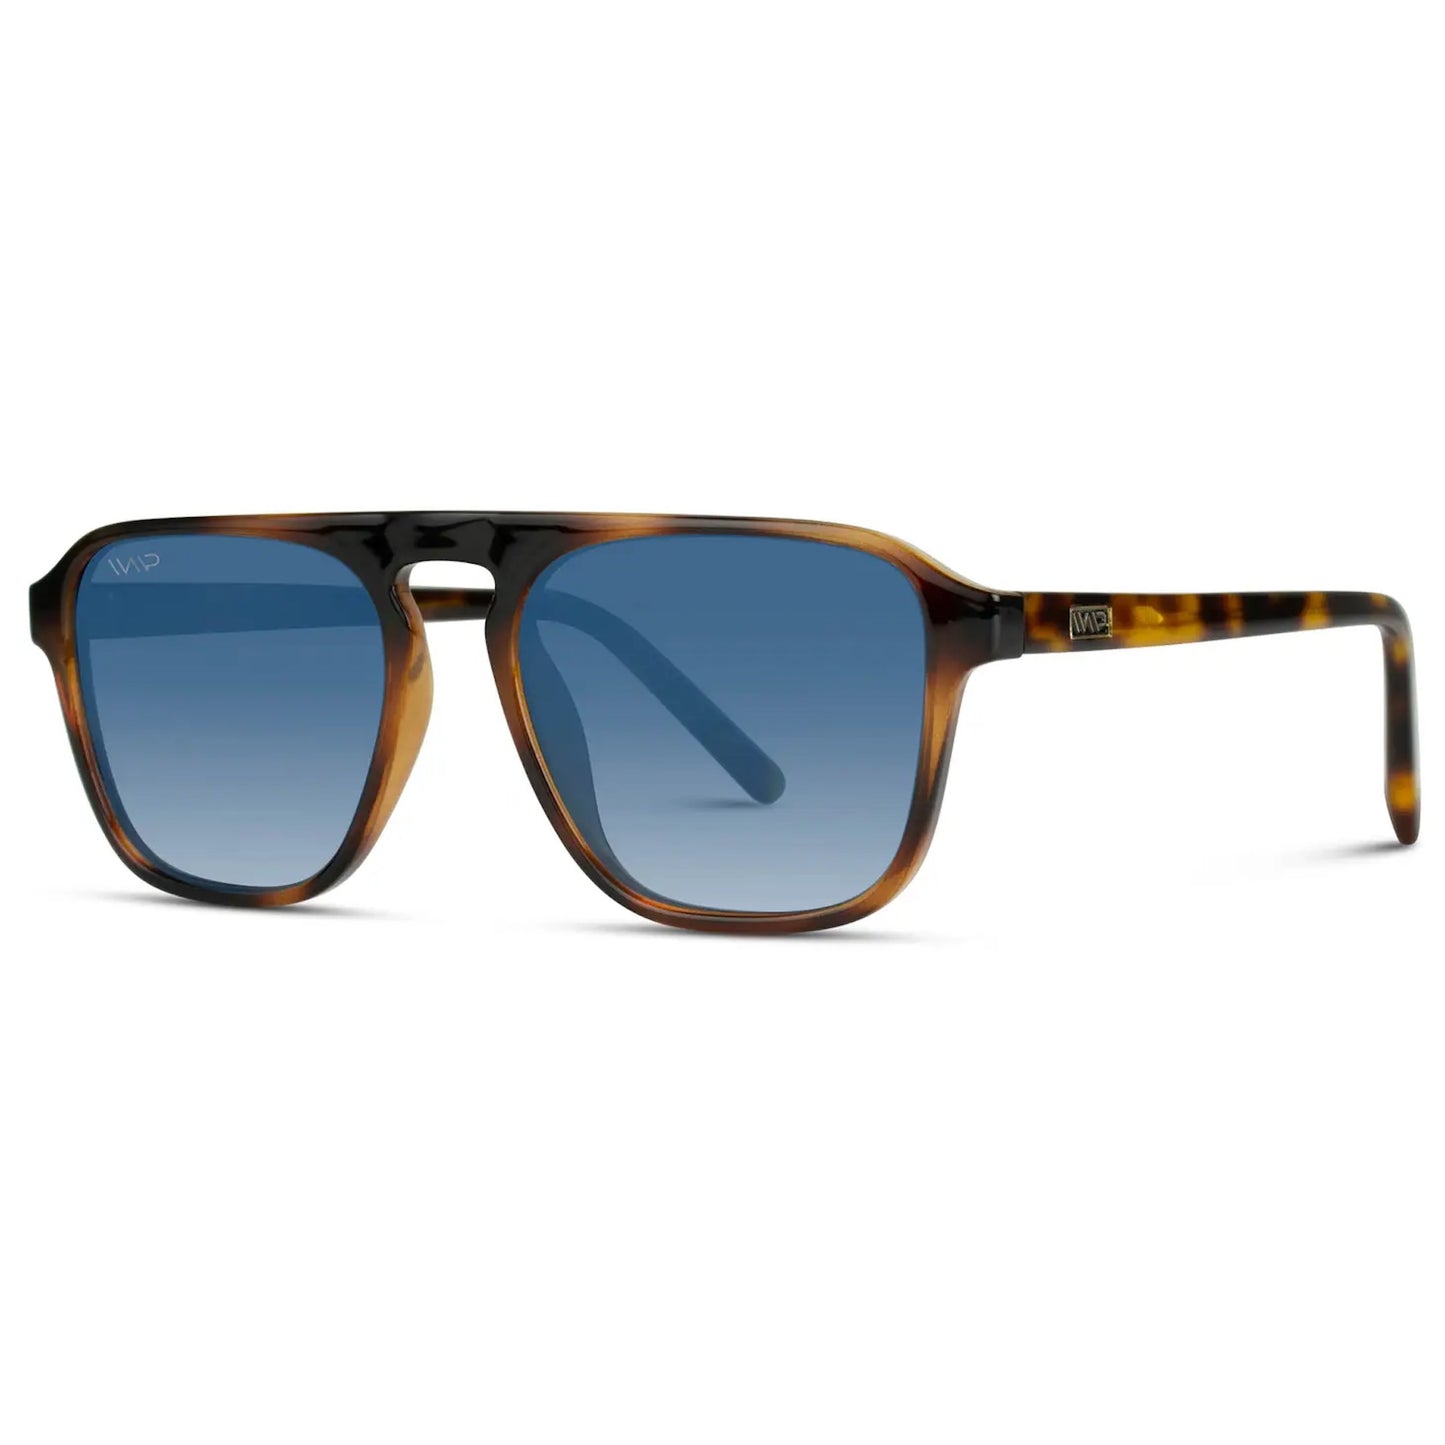 EMERSON SUNGLASSES - WHISKEY BROWN